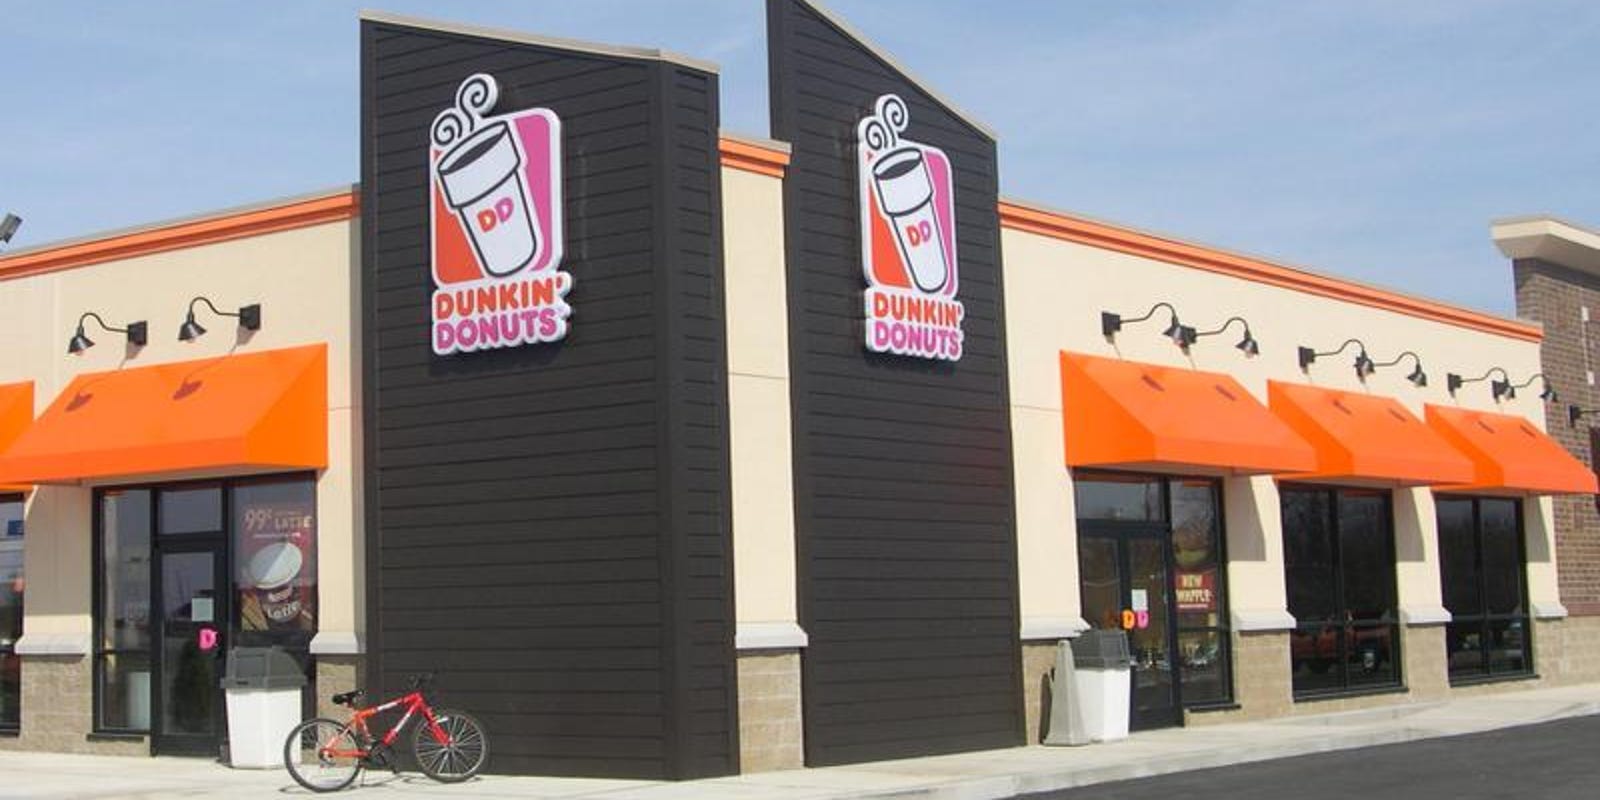 Dunkin Donuts Starbucks Olive Garden Hotel Headed To Indy Area